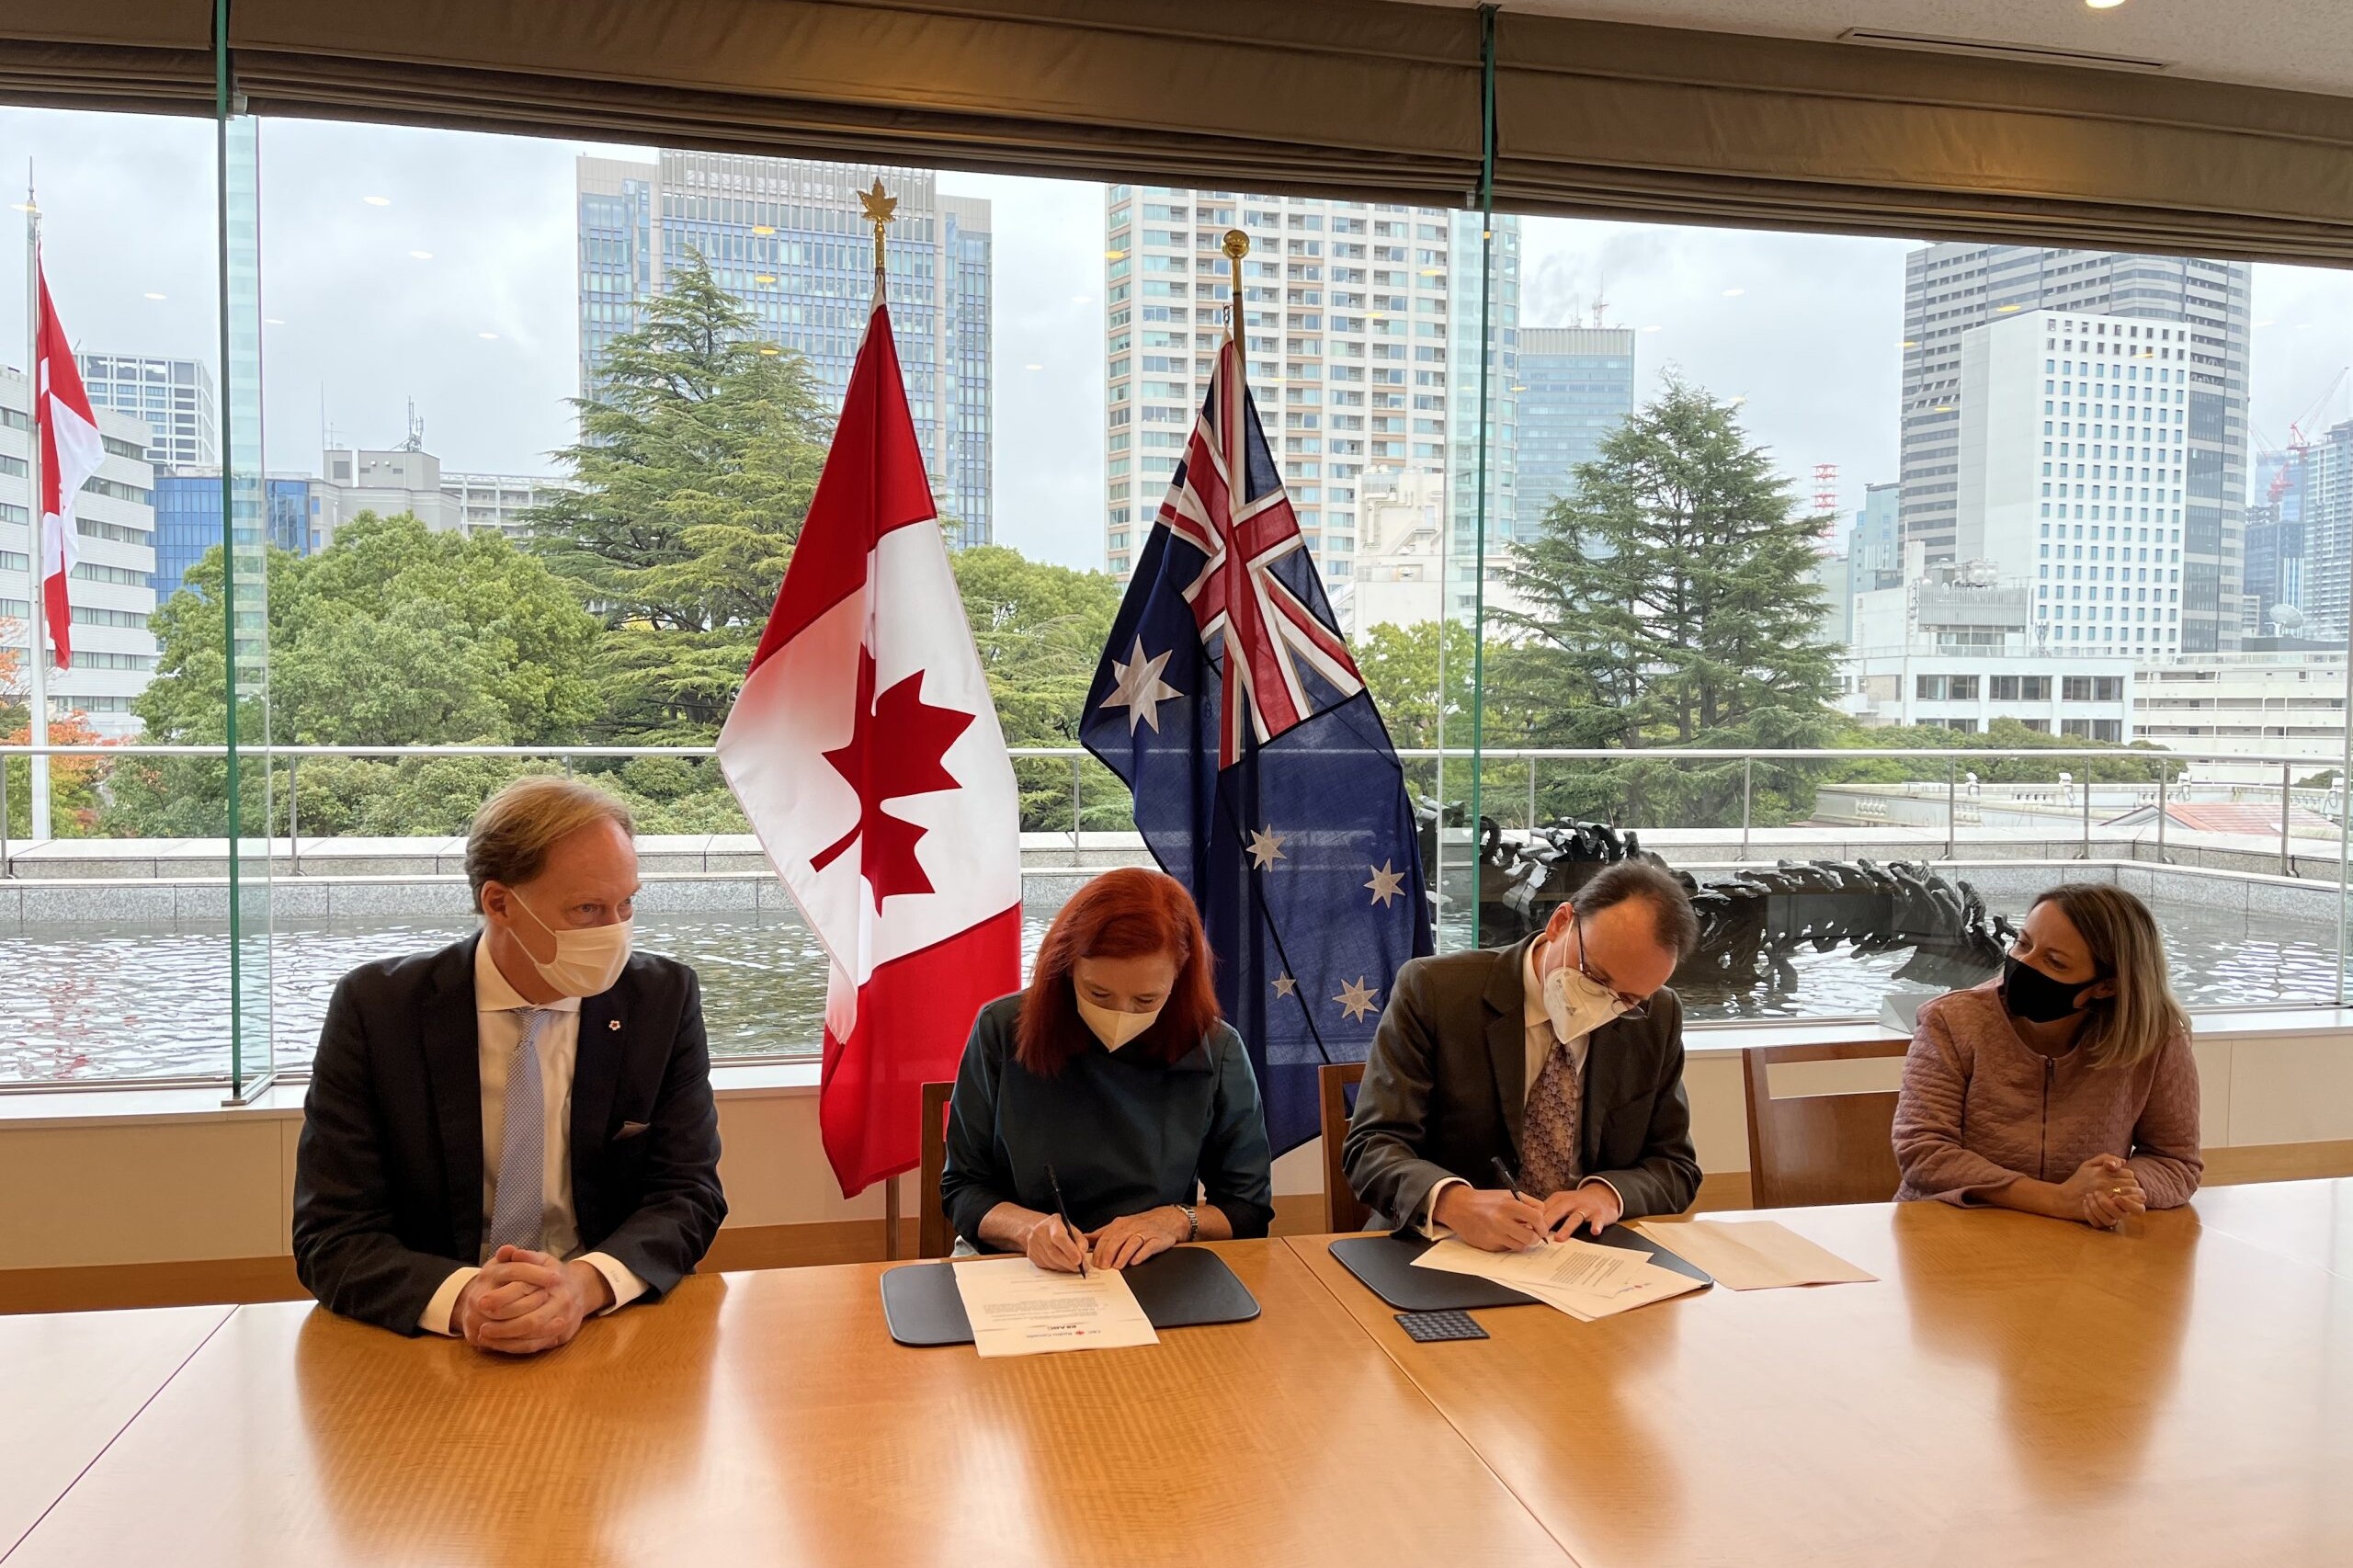 Catherine Tait, the President and CEO of CBC/Radio-Canada with David Sutton, Senior Strategist at ABC – on behalf of Managing Director, David Anderson – signing the Memorandum of Understanding at the Canadian Embassy in Tokyo, Japan.